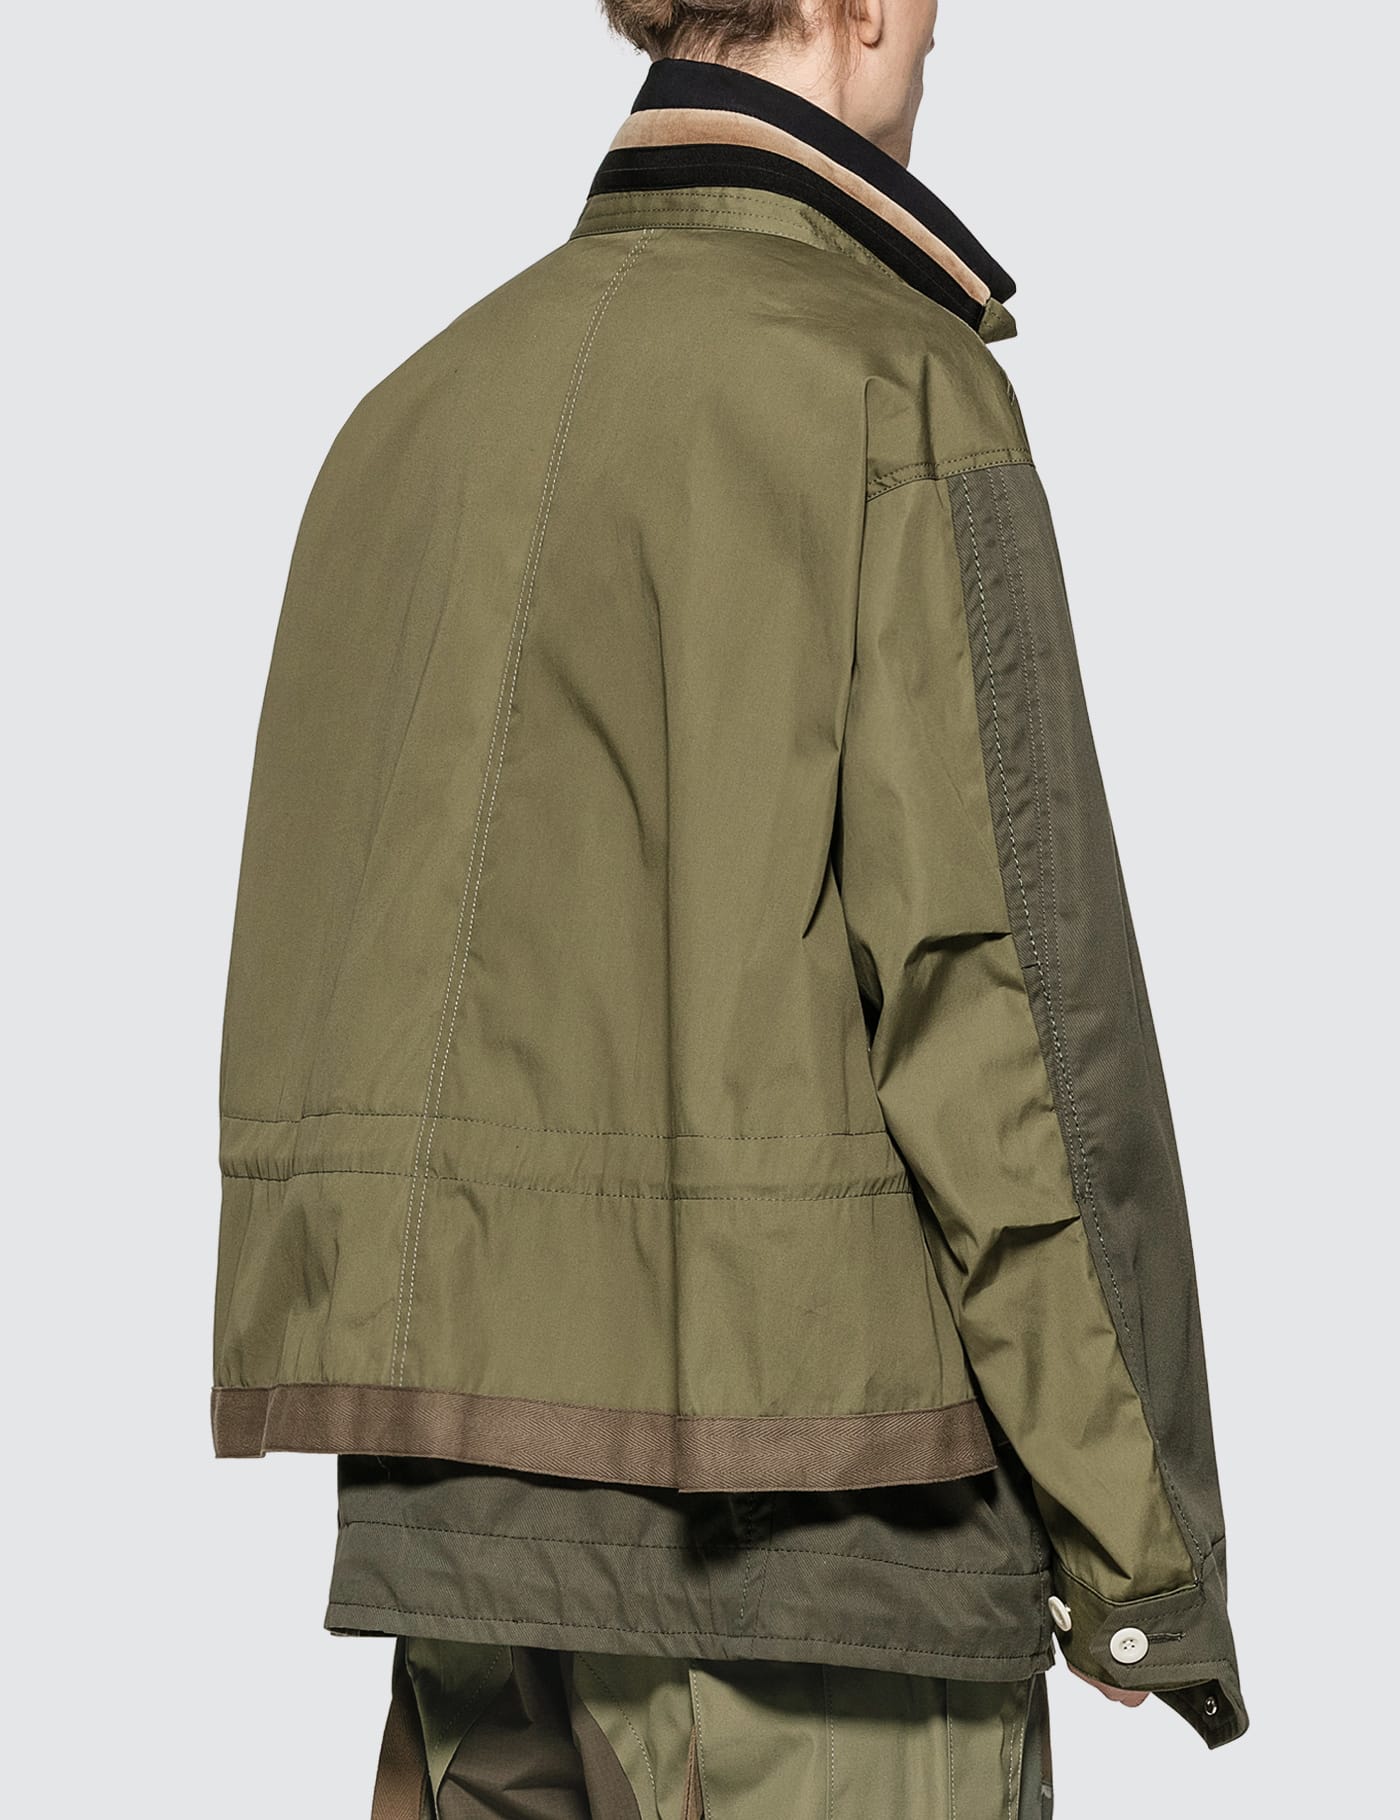 Sacai - Fabric Combo Jacket | HBX - Globally Curated Fashion and Lifestyle  by Hypebeast